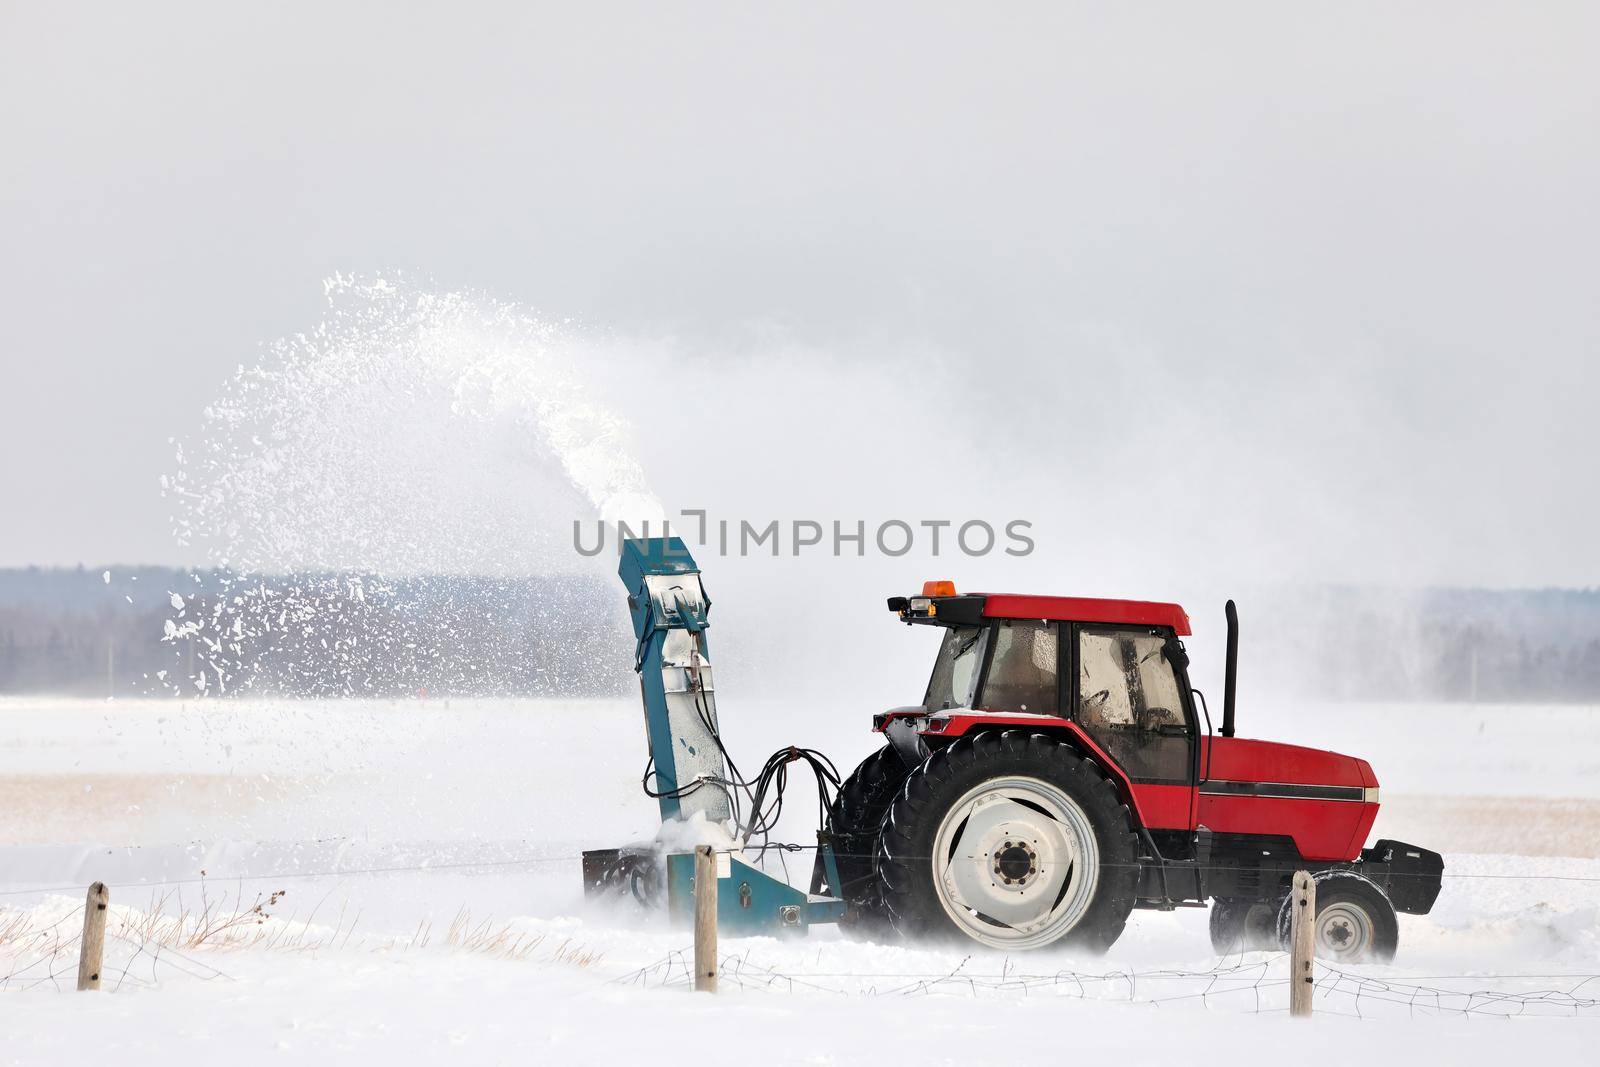 Red Tractor with snowblower attachment Snow Blowing a Driveway in a Rural Setting. It's windy and the blown snow creates a large plume of snow. High quality photo